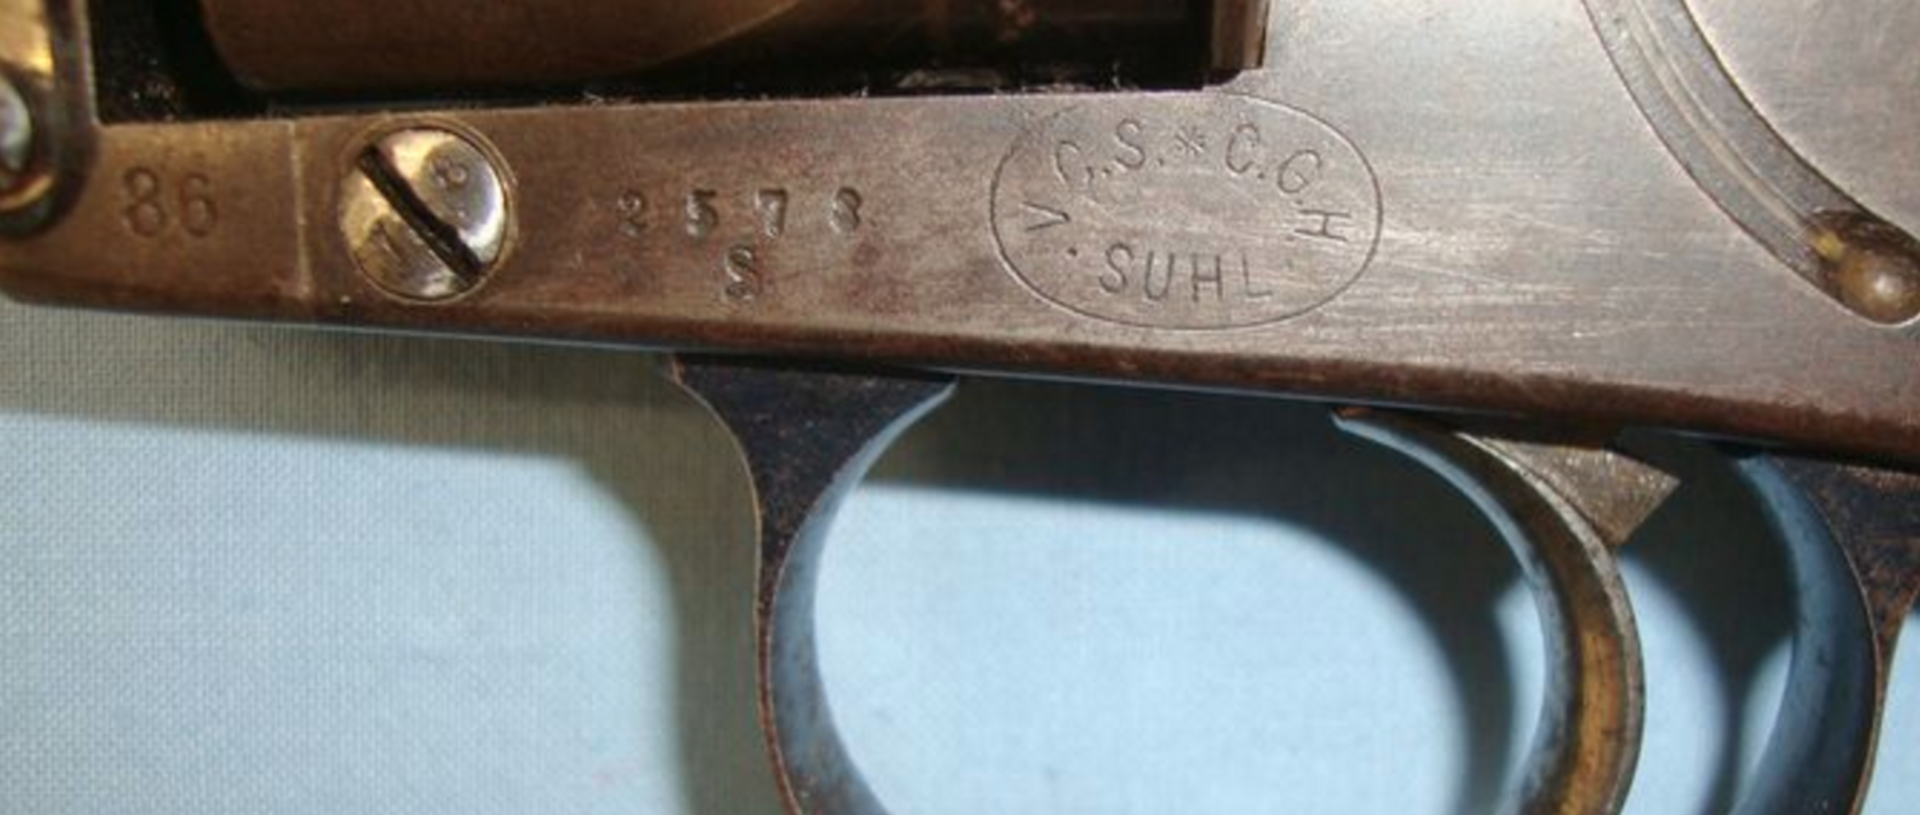 ALL MATCHING NUMBERS Imperial Prussian M/83 10.6 mm Reichs Revolver - Image 2 of 3